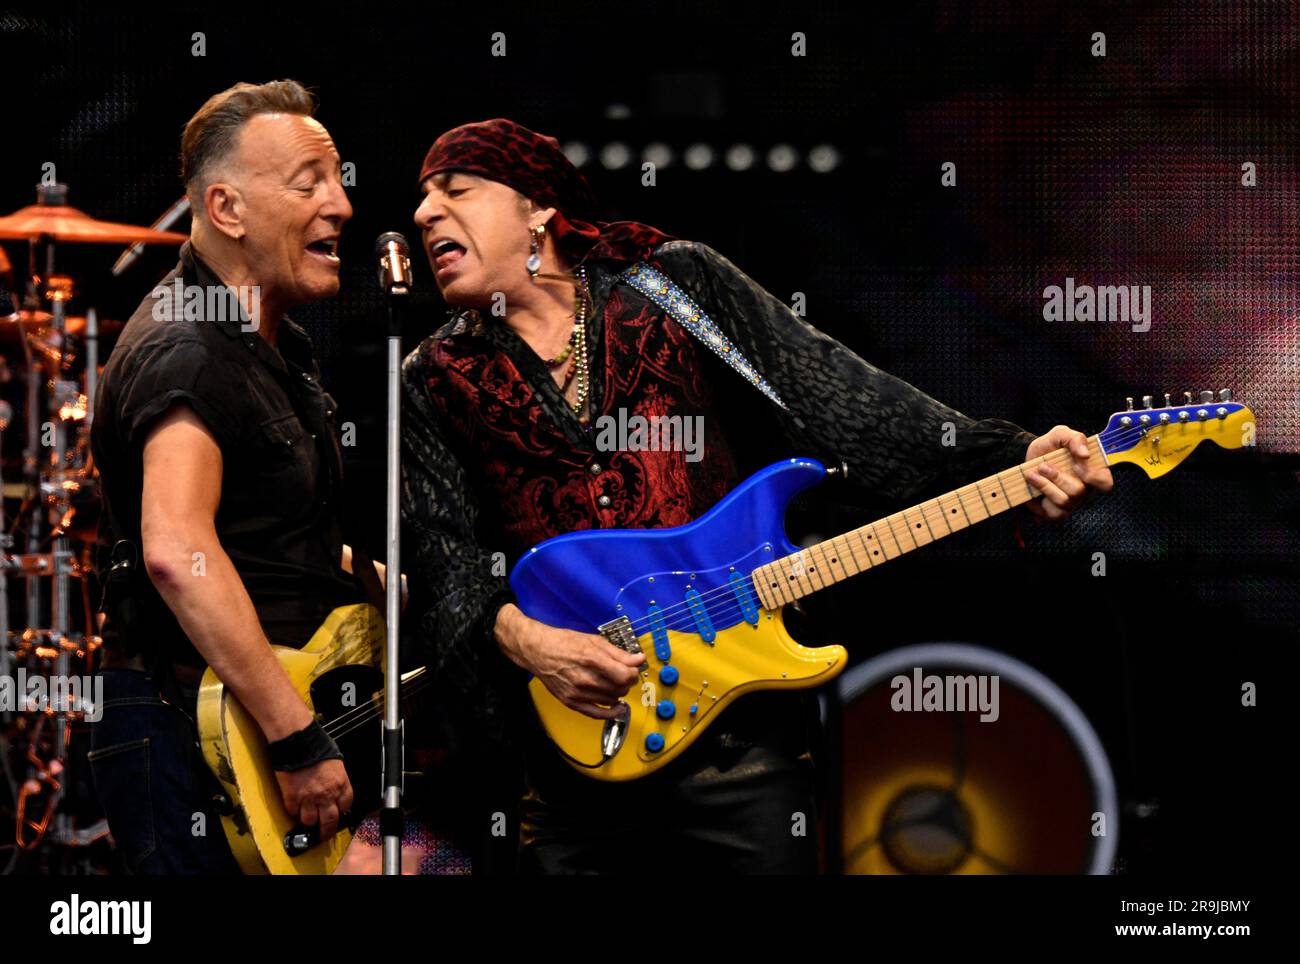 Bruce Springsteen and Steven Van Zandt, also known as 'The Boss' and 'Little Steven', in concert with the E Street Band in Gothenburg, Sweden 26 June Stock Photo